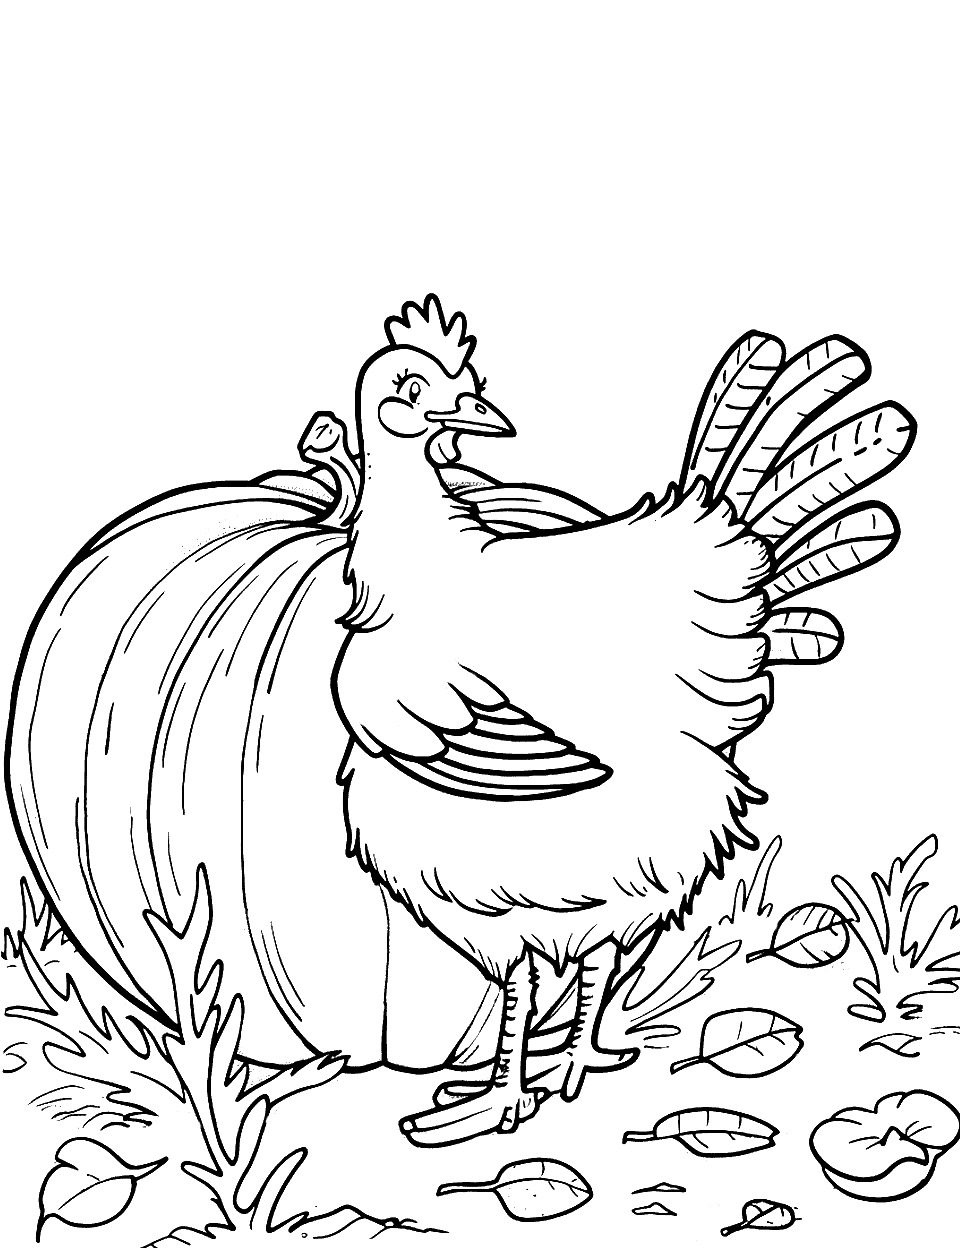 Hen and a Pumpkin Chicken Coloring Page - A hen curiously checking out a large pumpkin, set in a simple, autumnal scene.